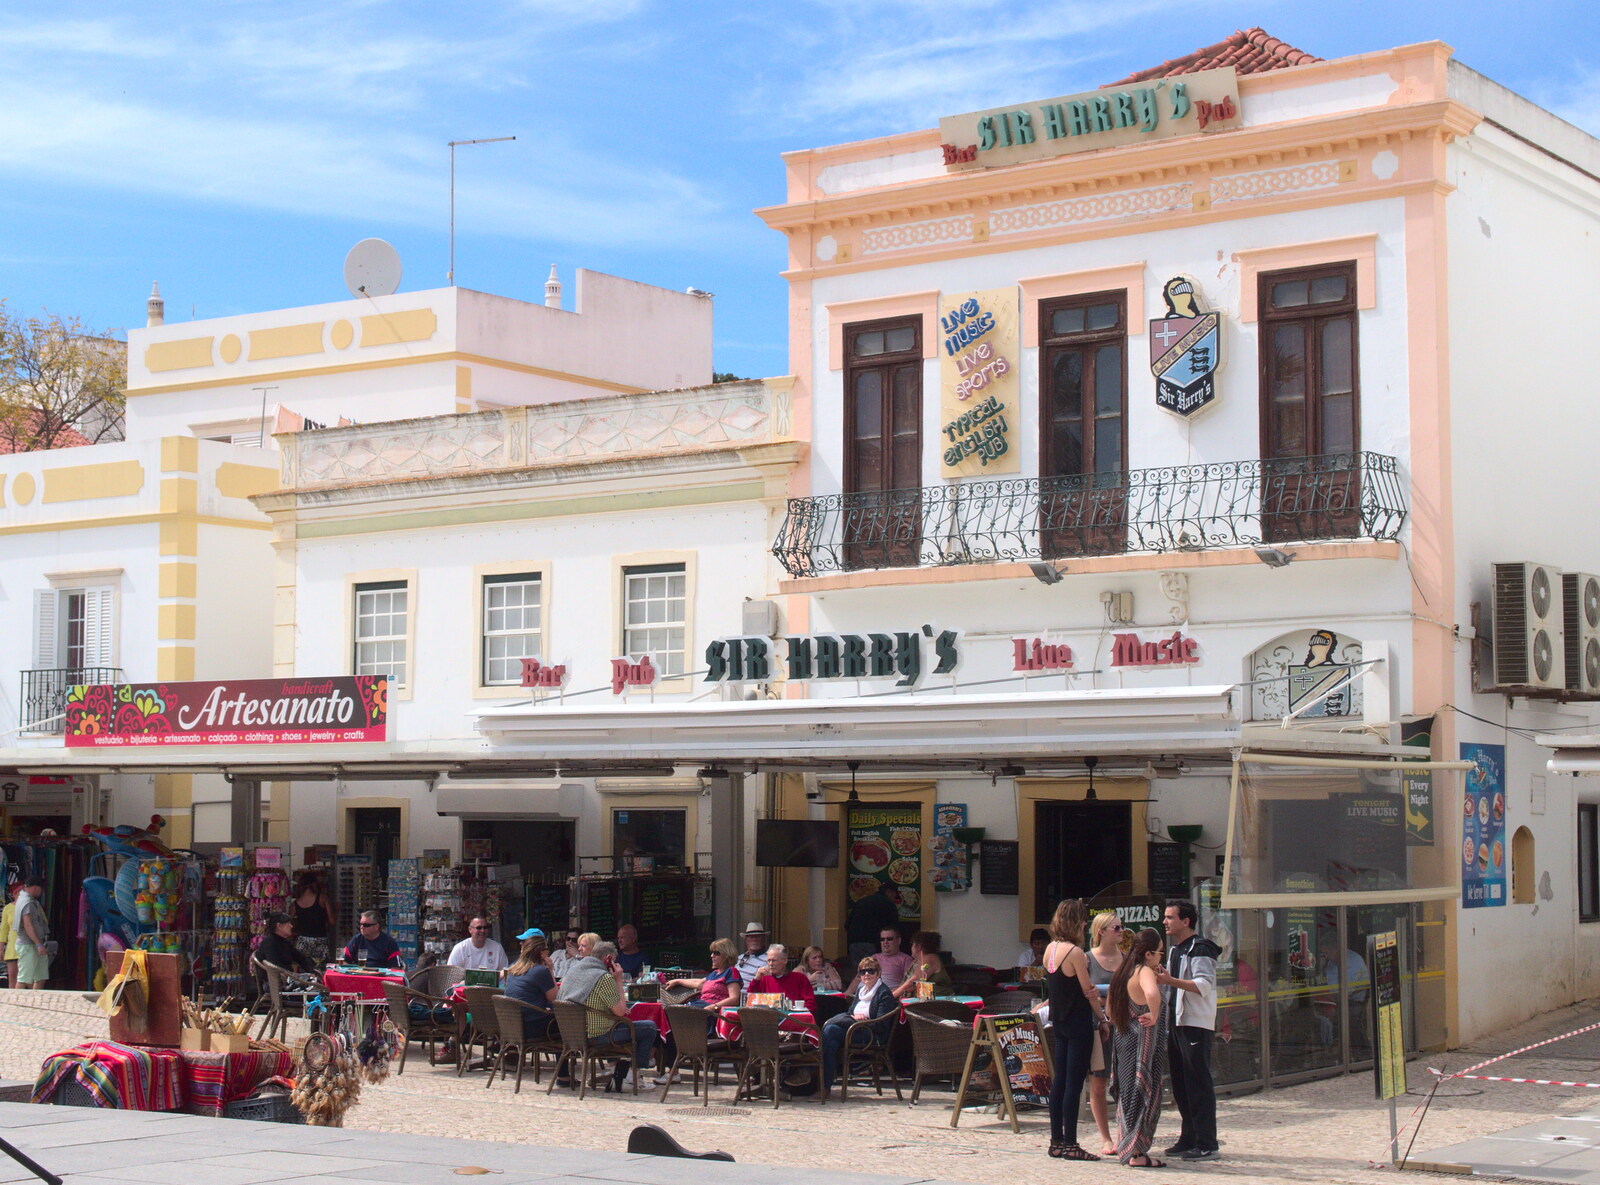 Our regular beer stop: Sir Harry's Bar from Last Days and the Journey Home, Albufeira, Portugal - 9th April 2016